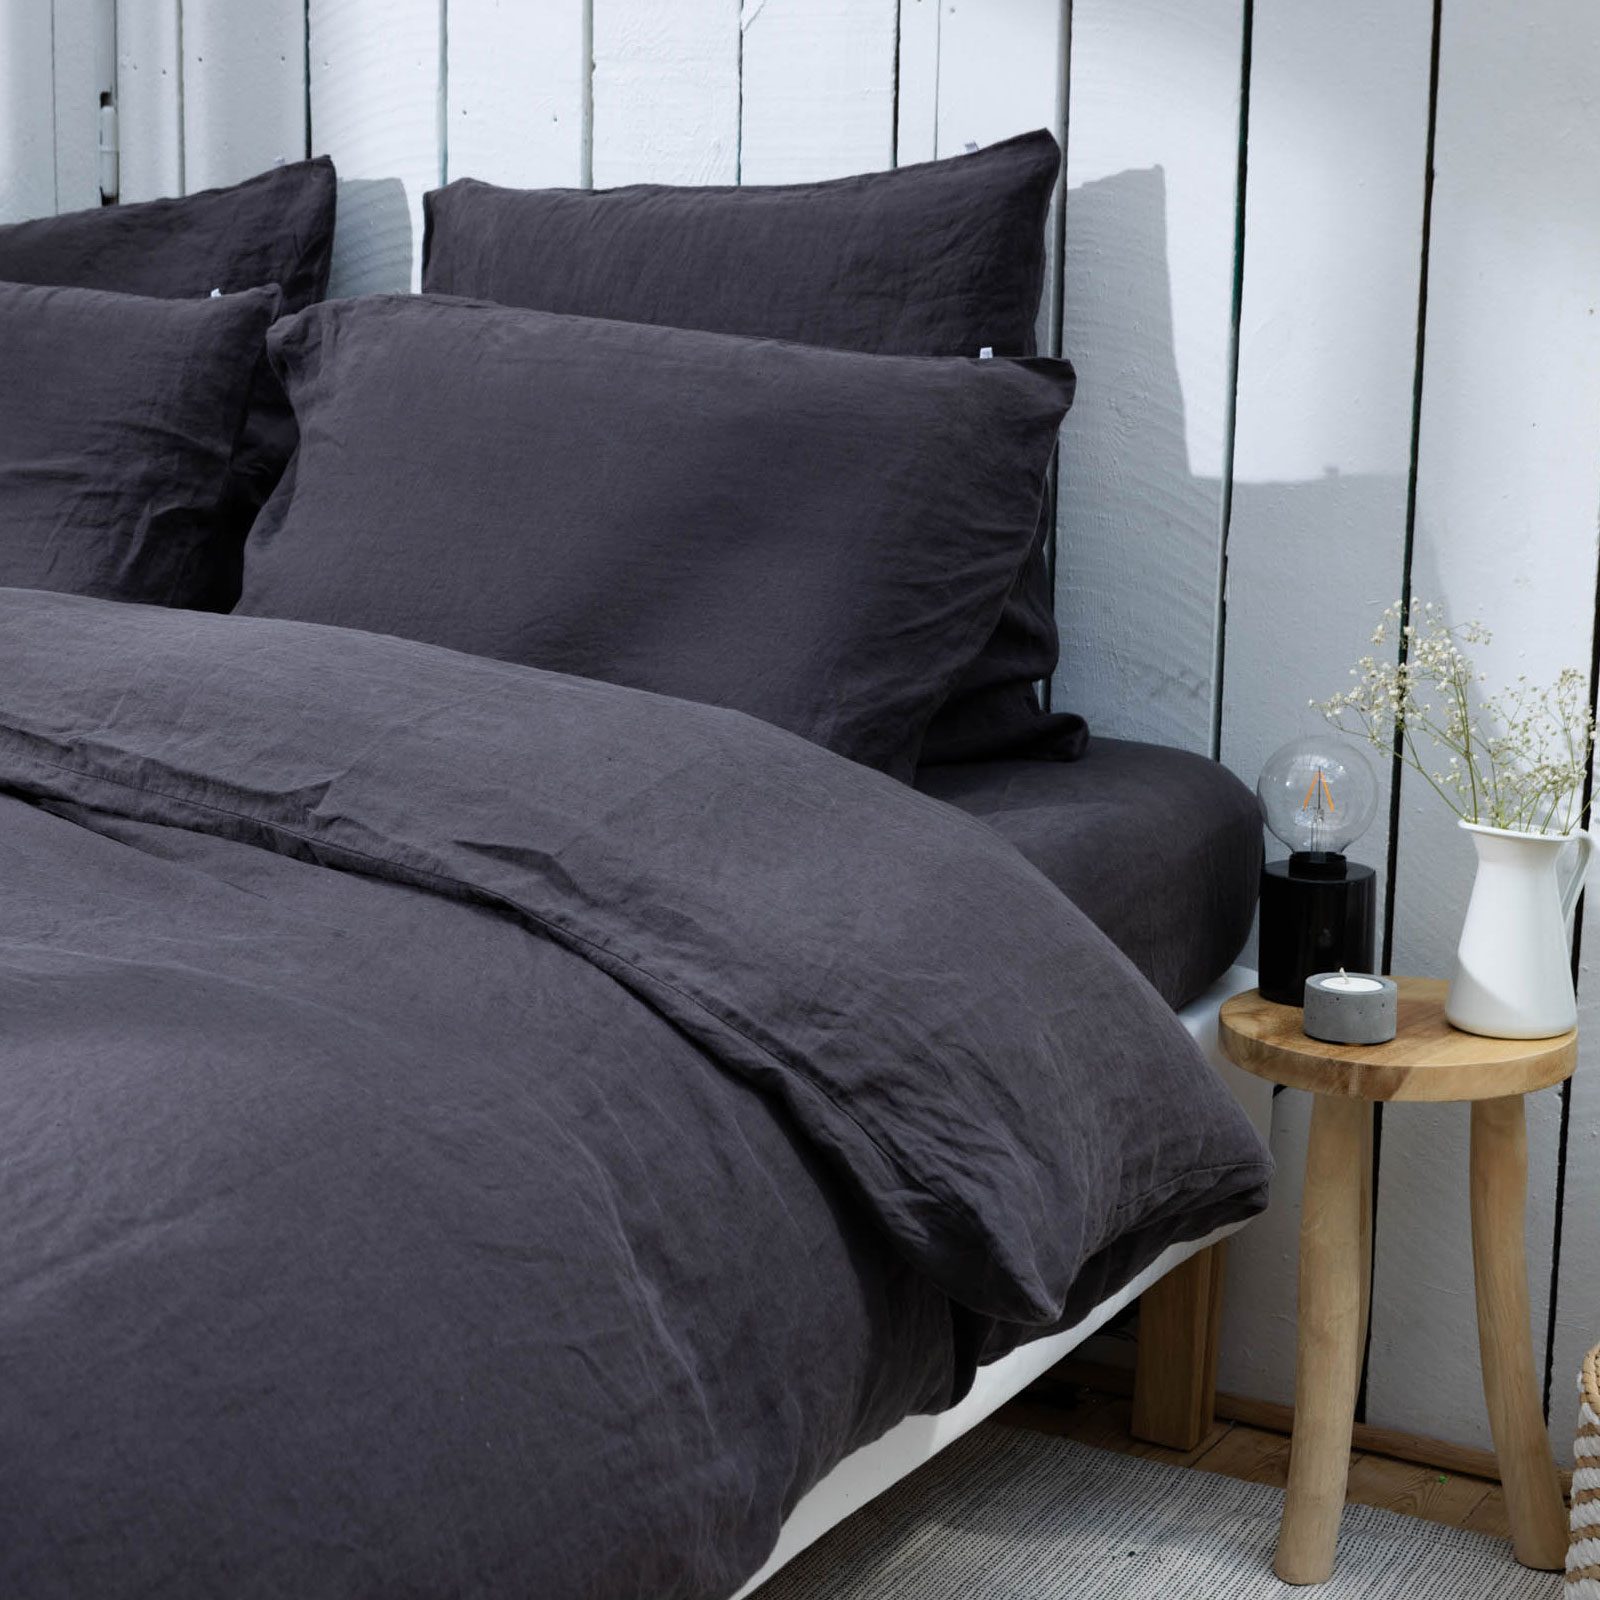 stone-washed-linen-duvet-cover-anthracite-3